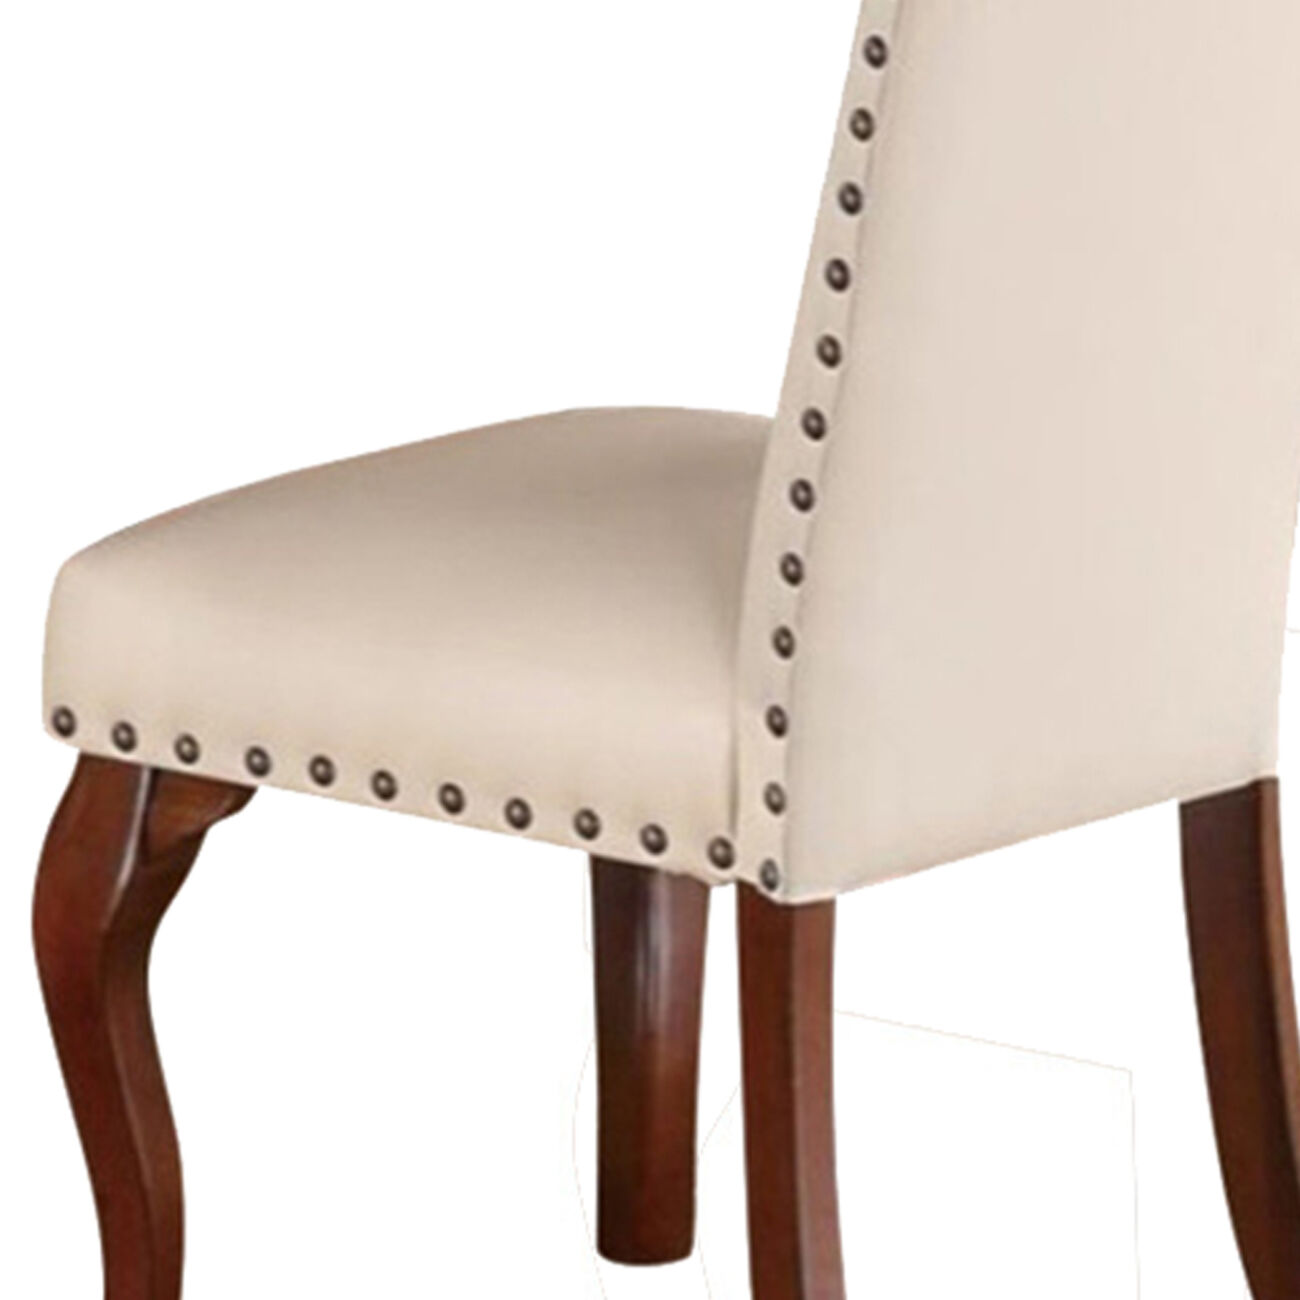 Commendable Rubber Wood Faux Leather Dining Chair, Cream (Set of 2)